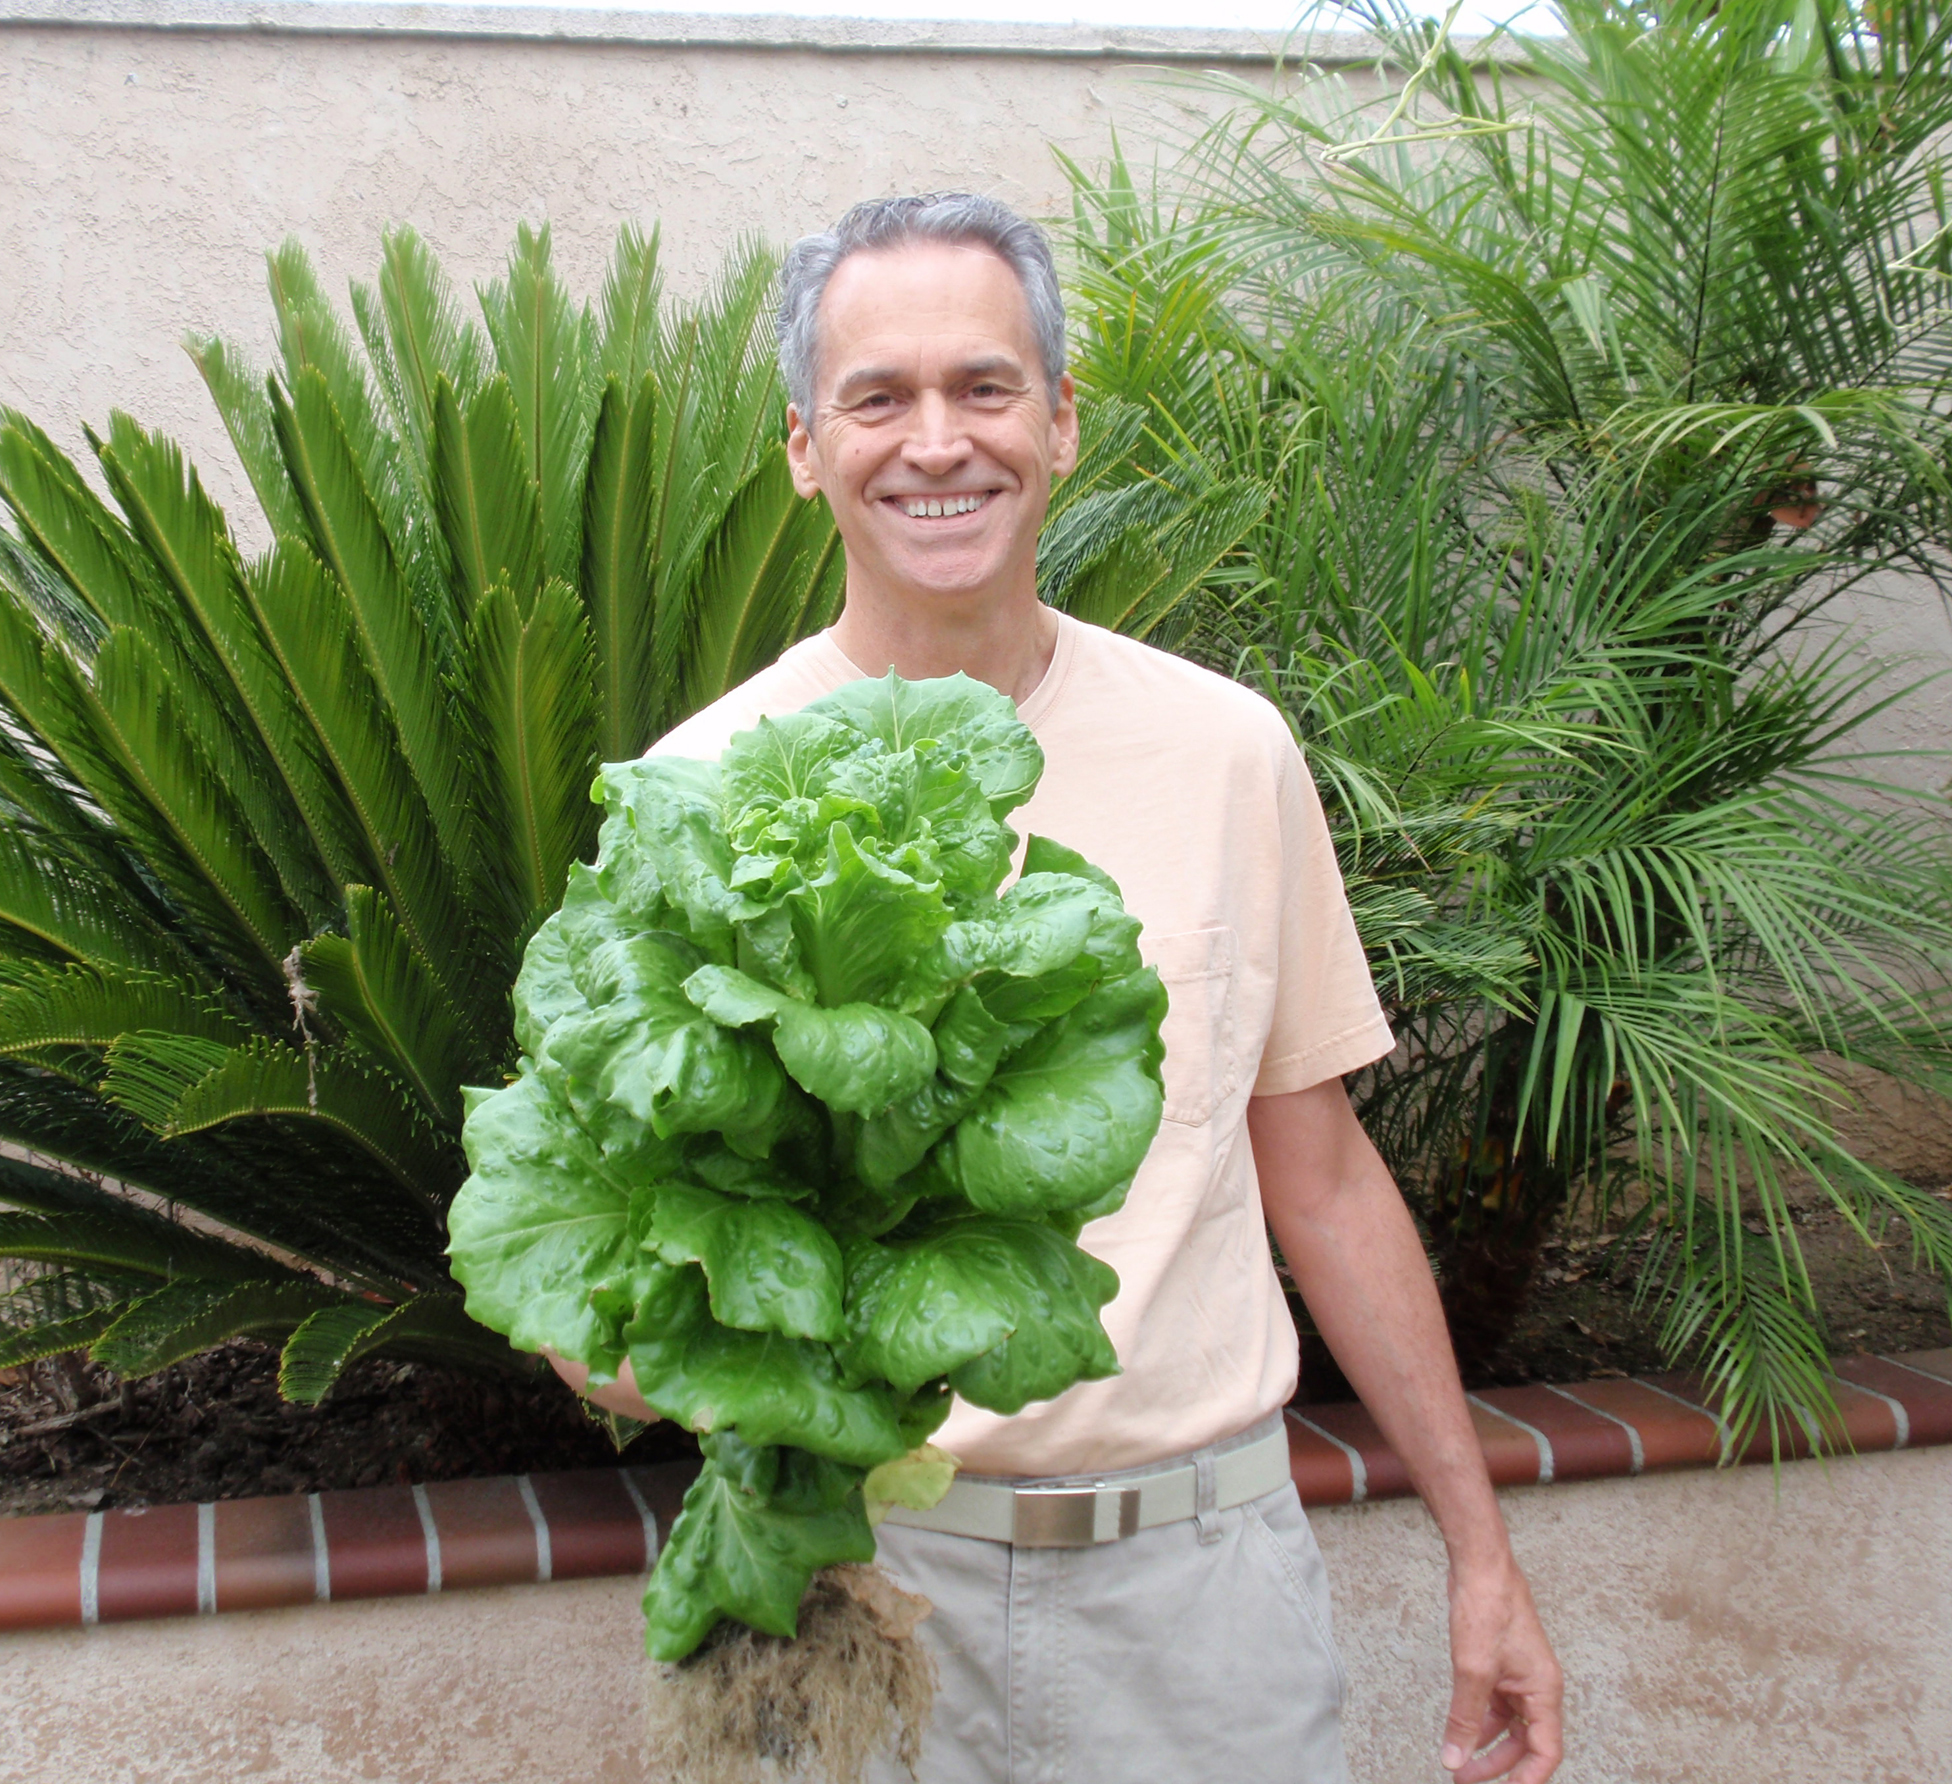  lettuce from one of his own Portable Farms™ Aquaponics Systems that